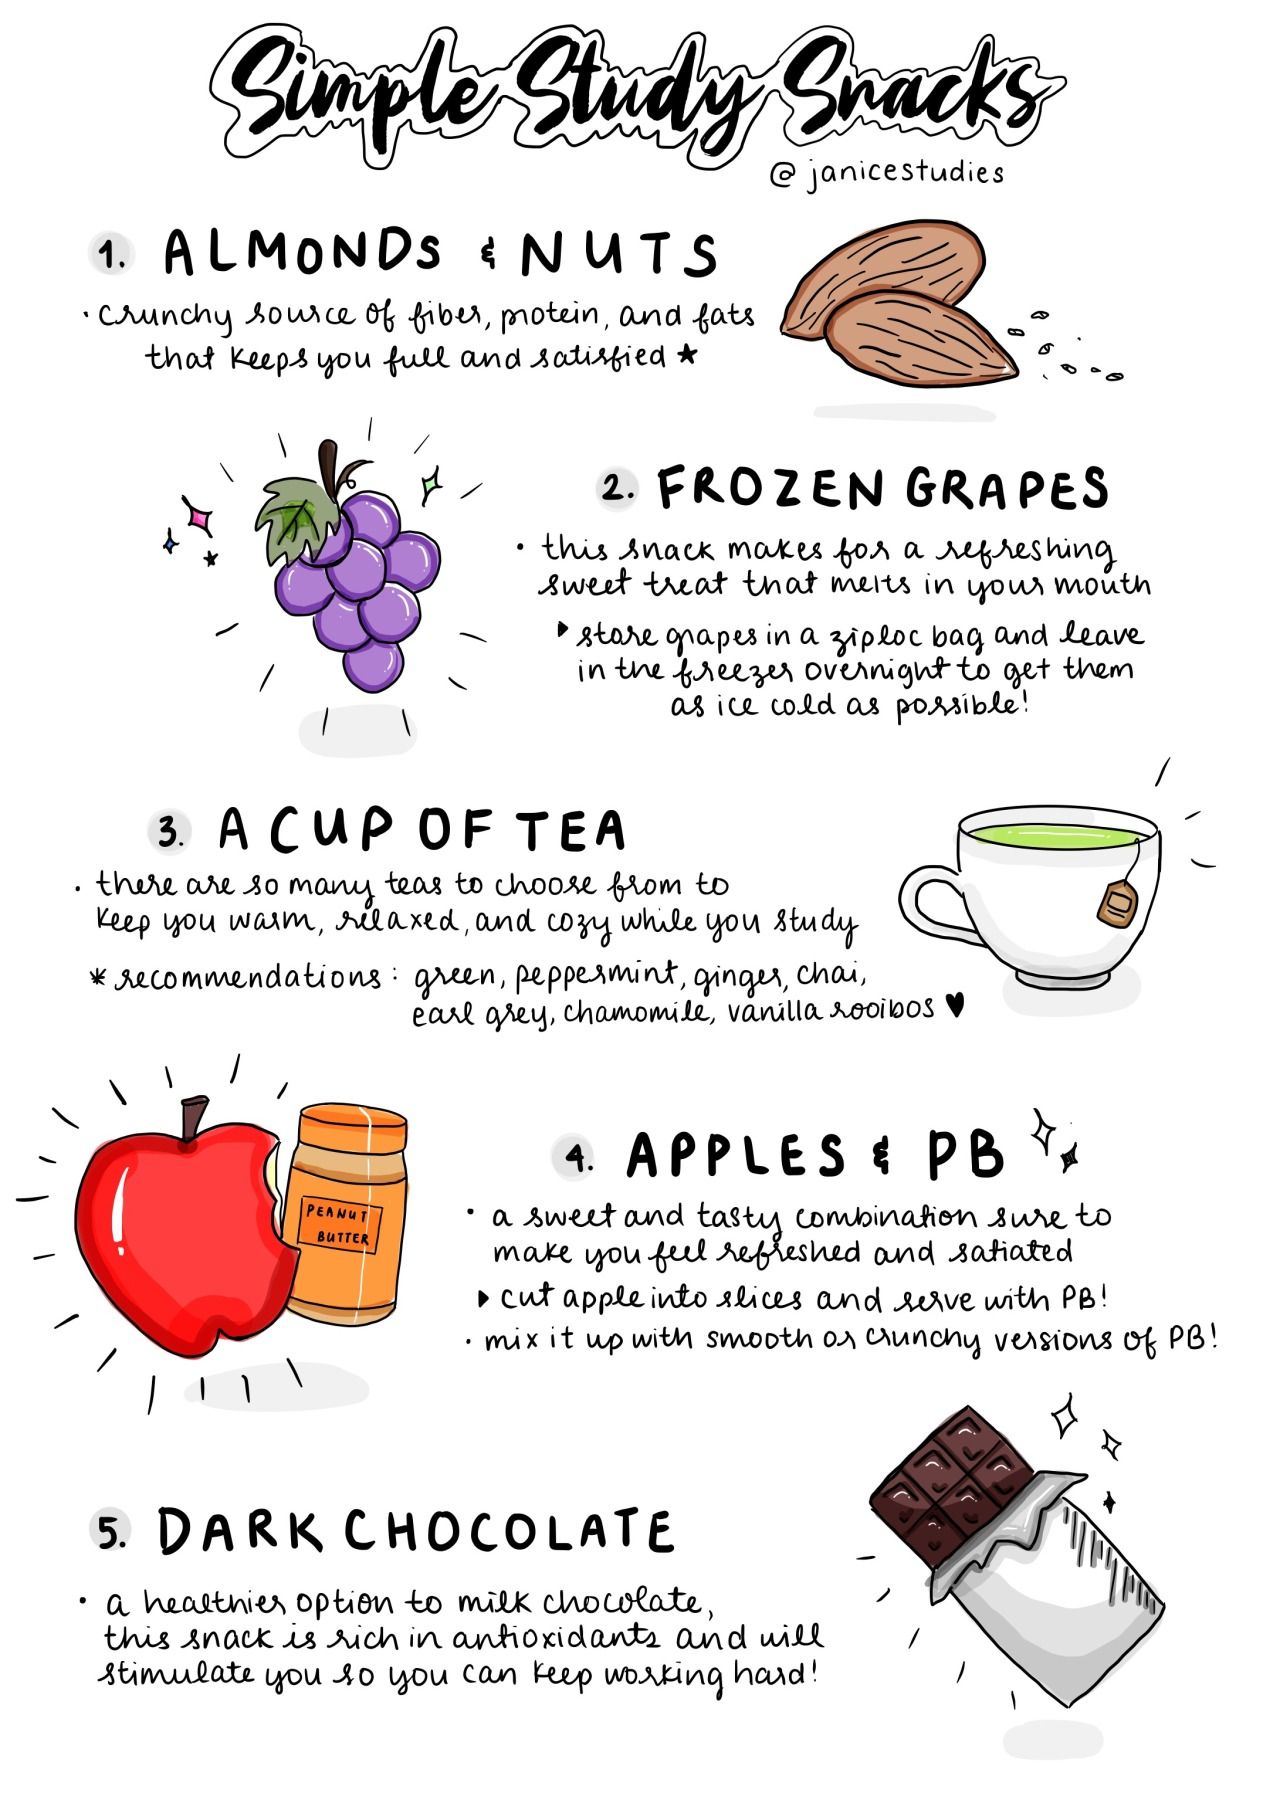 Simple And Healthy Snack Options For Your Study Sessions